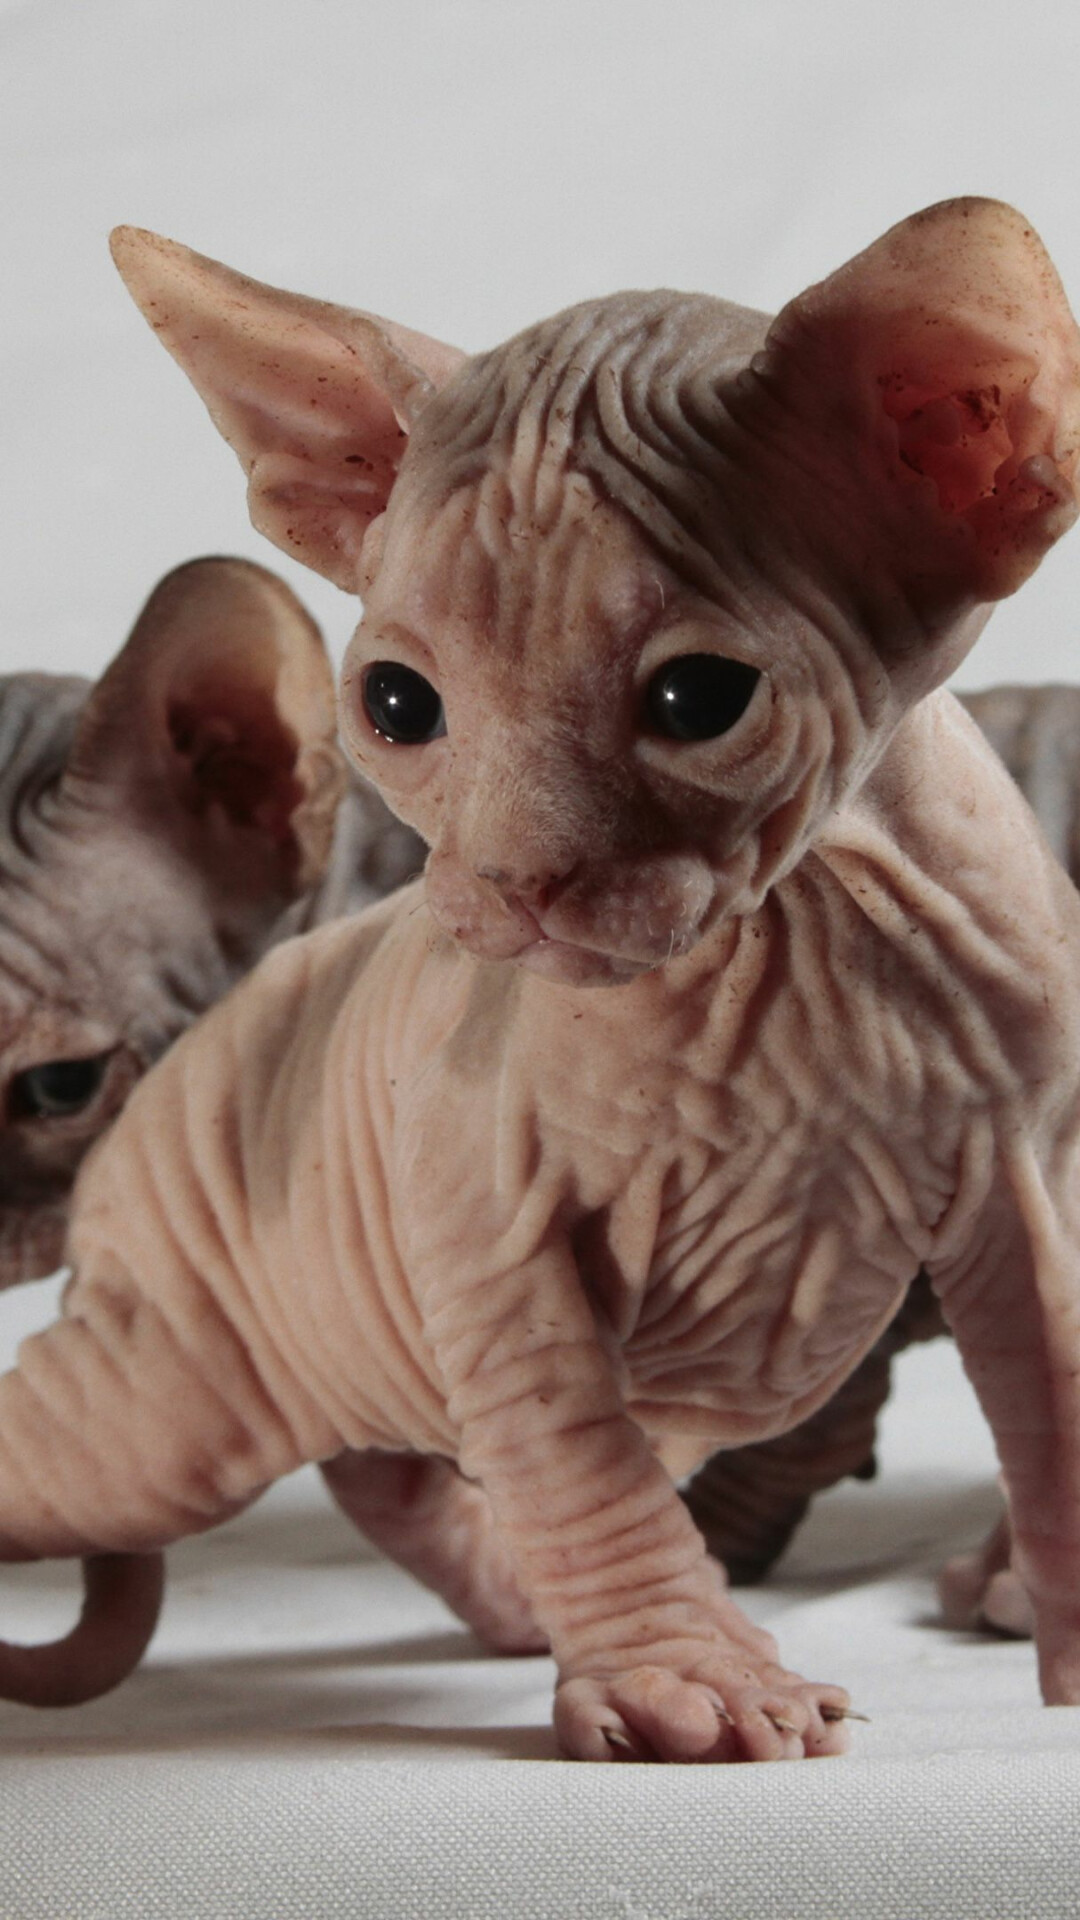 Sphynx: A medium-sized cat distinctively known for its bald, wrinkly skin. 1080x1920 Full HD Background.